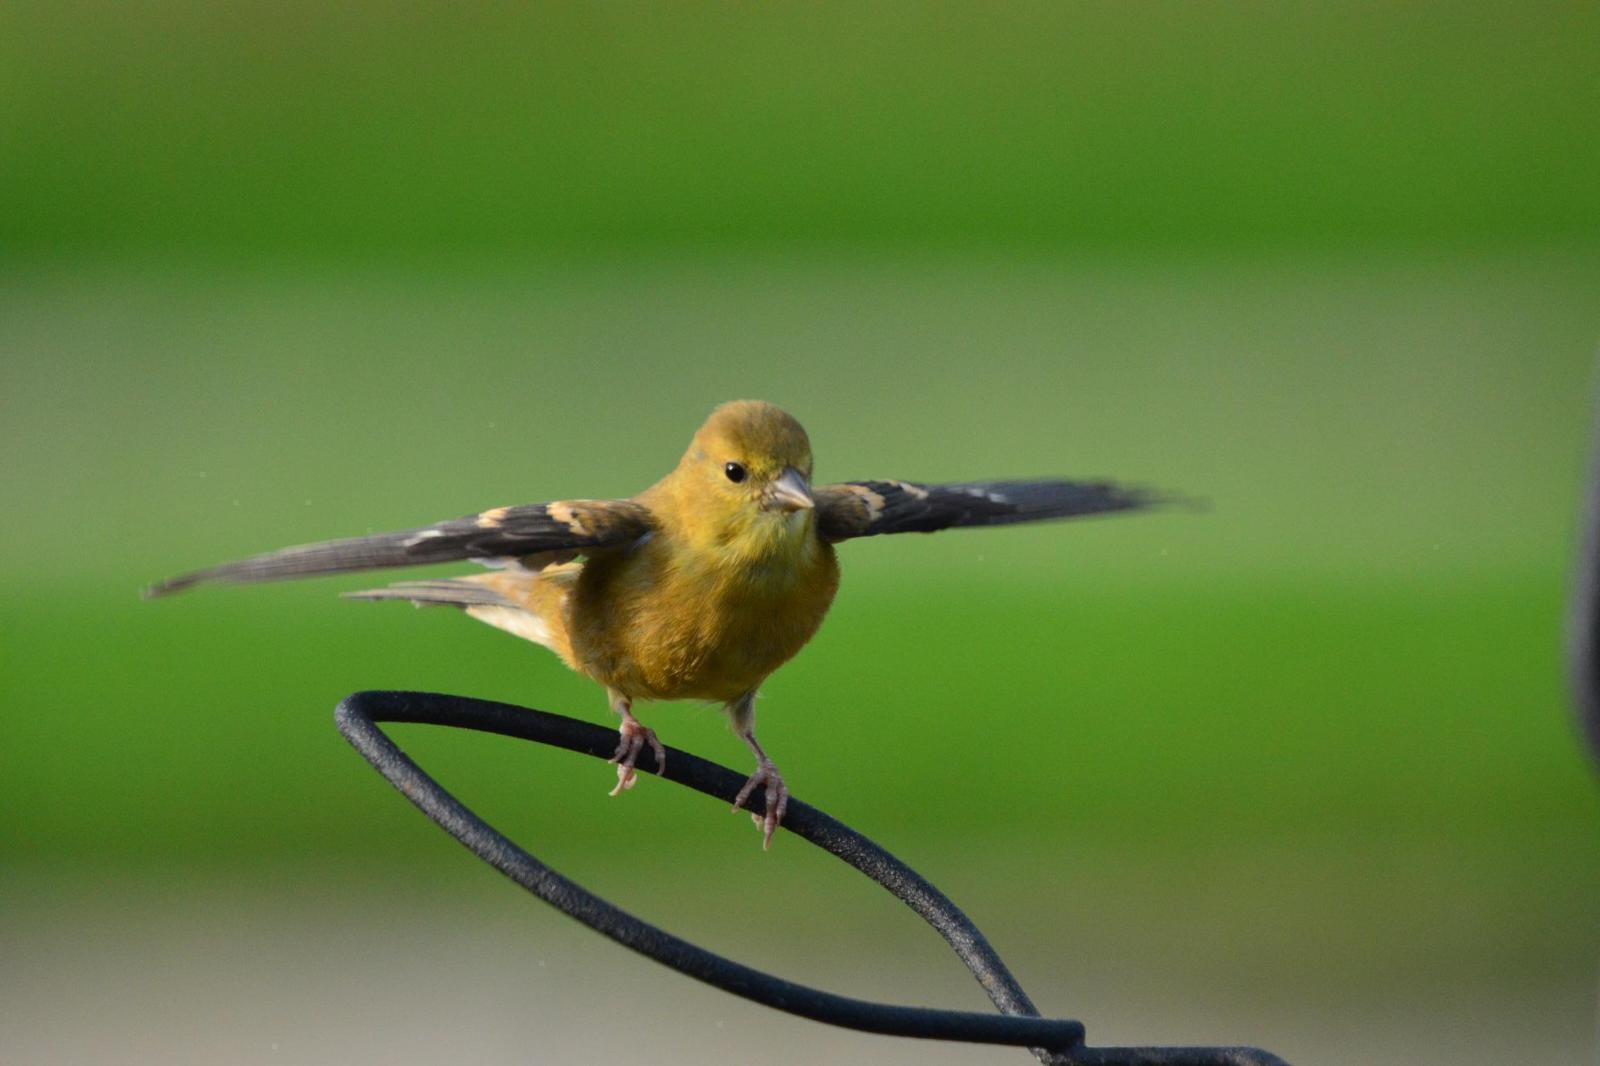 American Goldfinch Photo by Linda Cote